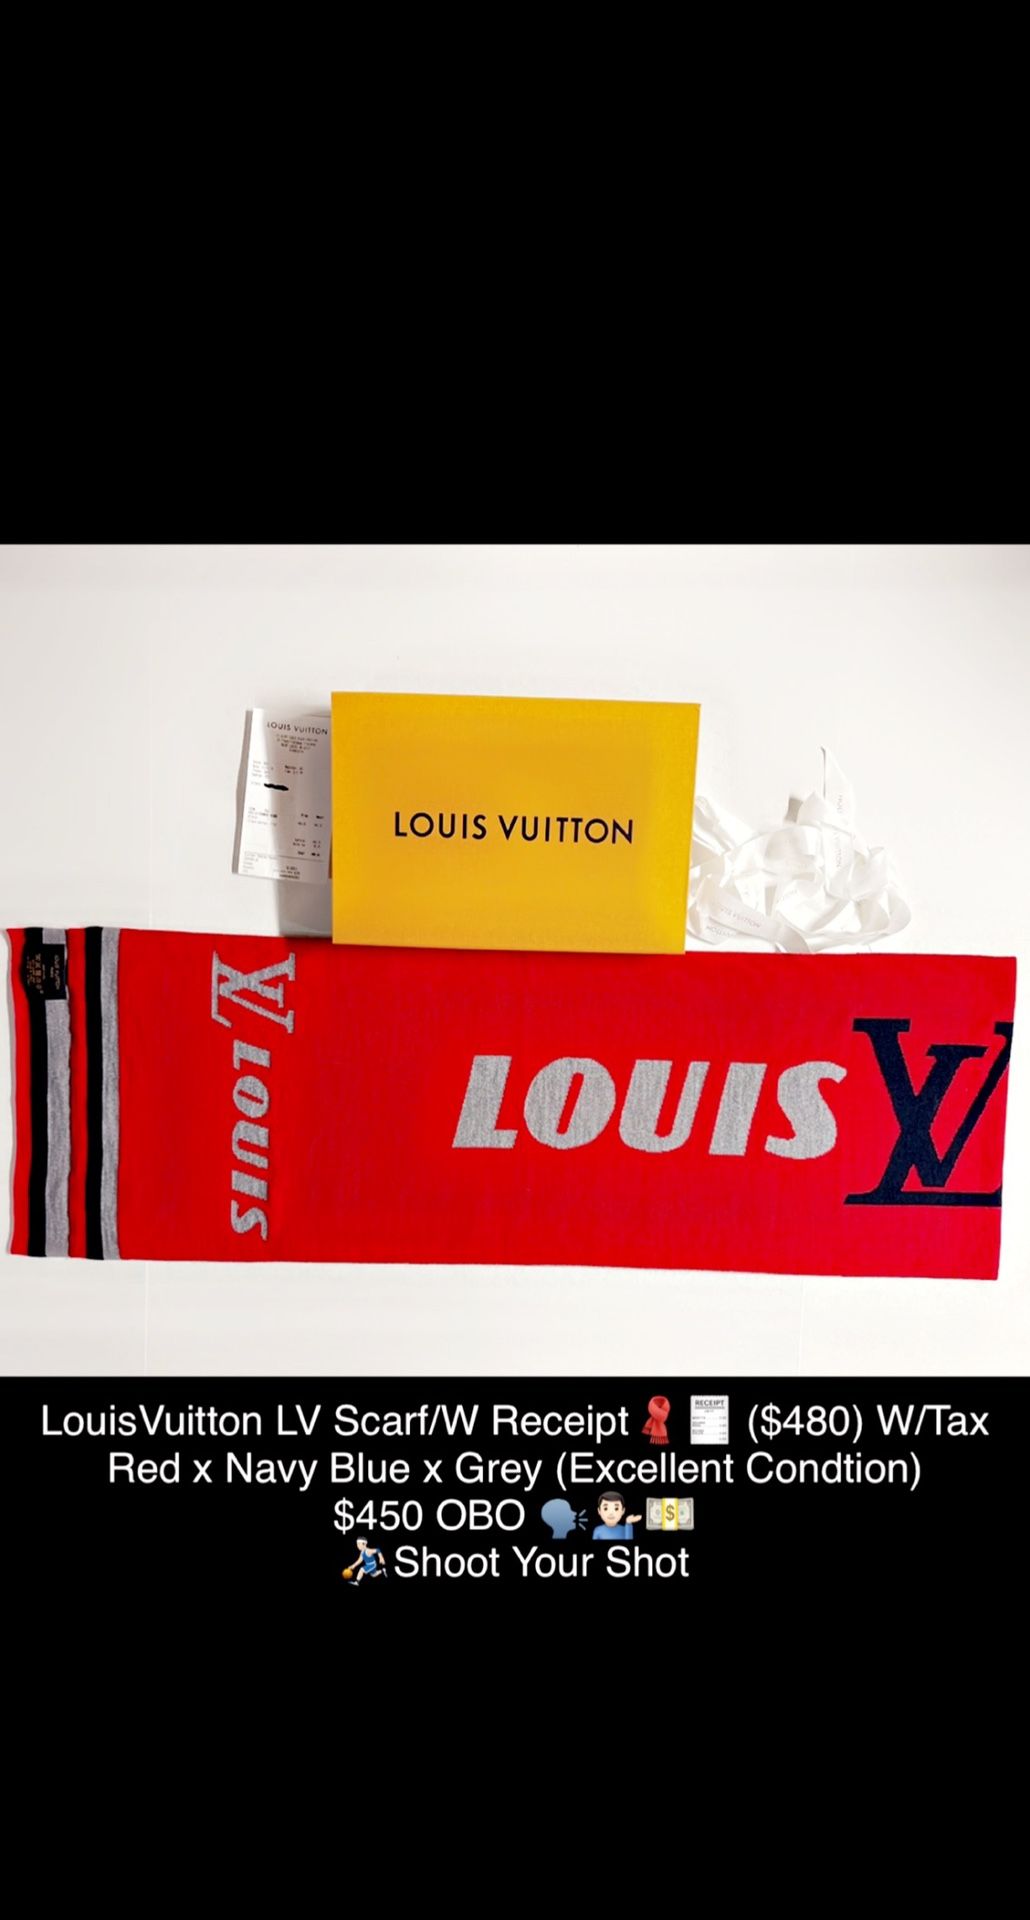 Louis Vuitton LV Scarf W/Receipt🧣🧾 ($480) W/Tax Red X Navy Blue X Grey (EXCELLENT CONDITION) $450 OBO ⛹🏻‍♂️Shoot Your Shot!